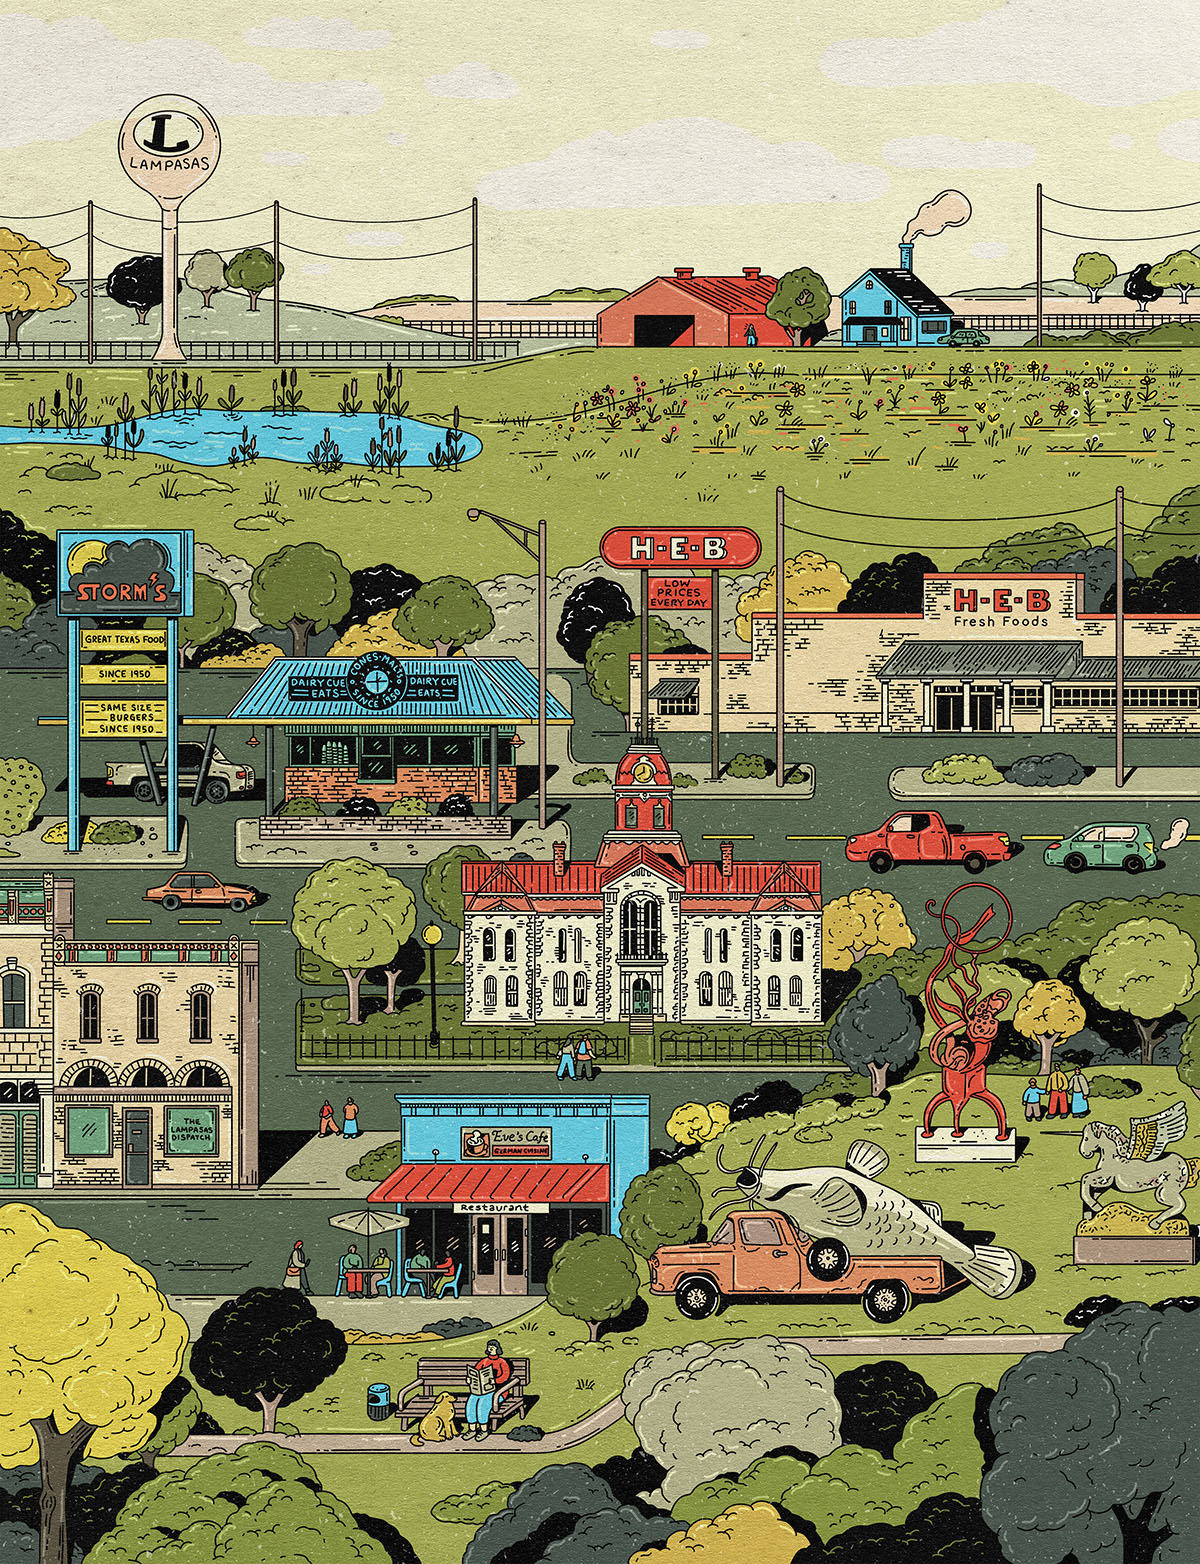 An illustration showing different scenes of Lampasas, including a courthouse, H-E-B, Shark's burger, water tower and more